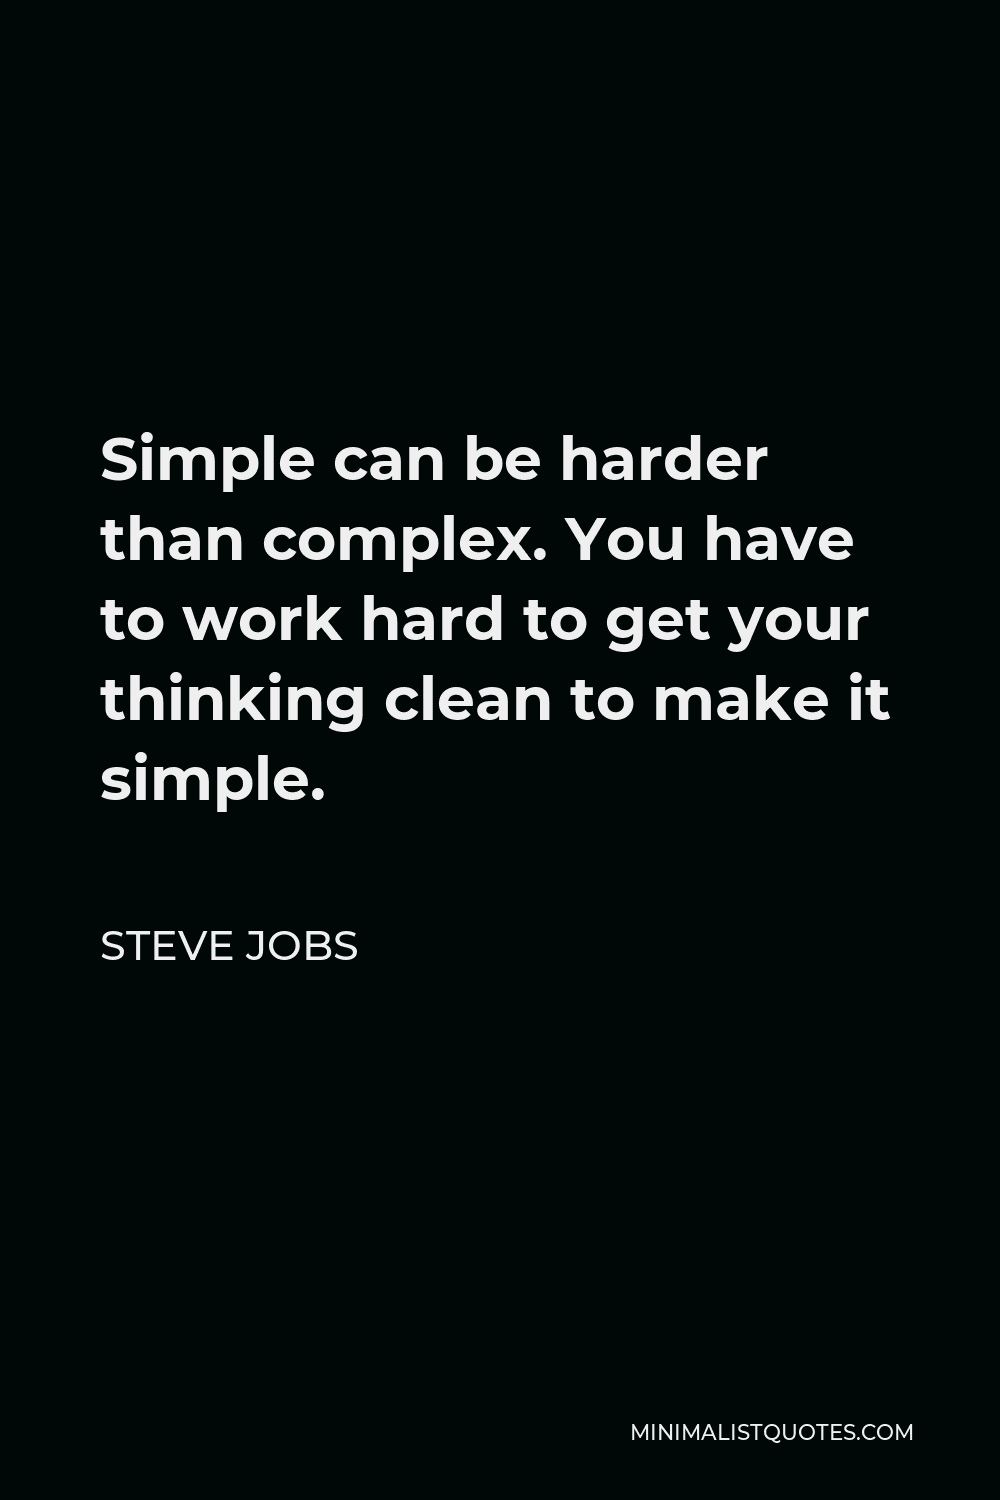 Steve Jobs Quote - Simple can be harder than complex. You have to work hard to get your thinking clean to make it simple.